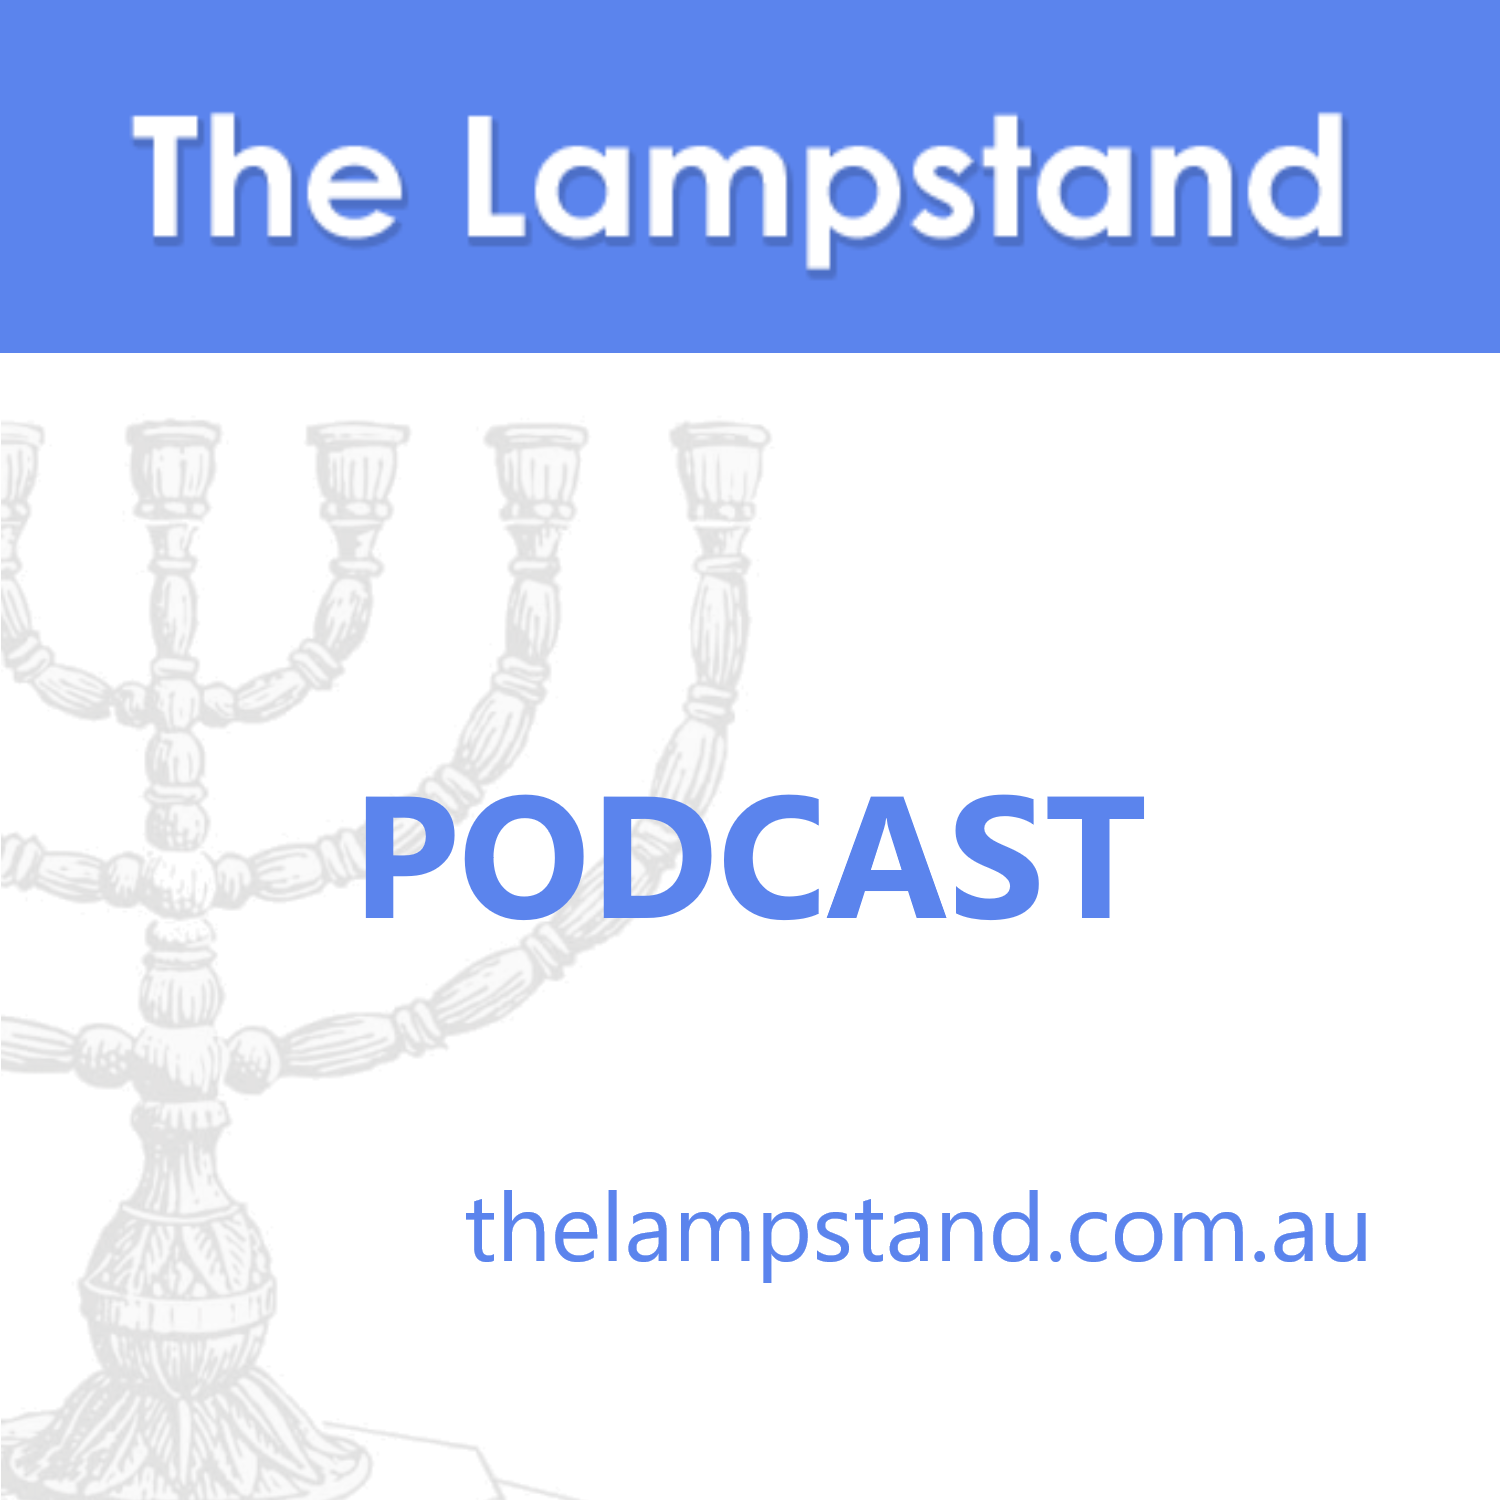 The Lampstand Magazine